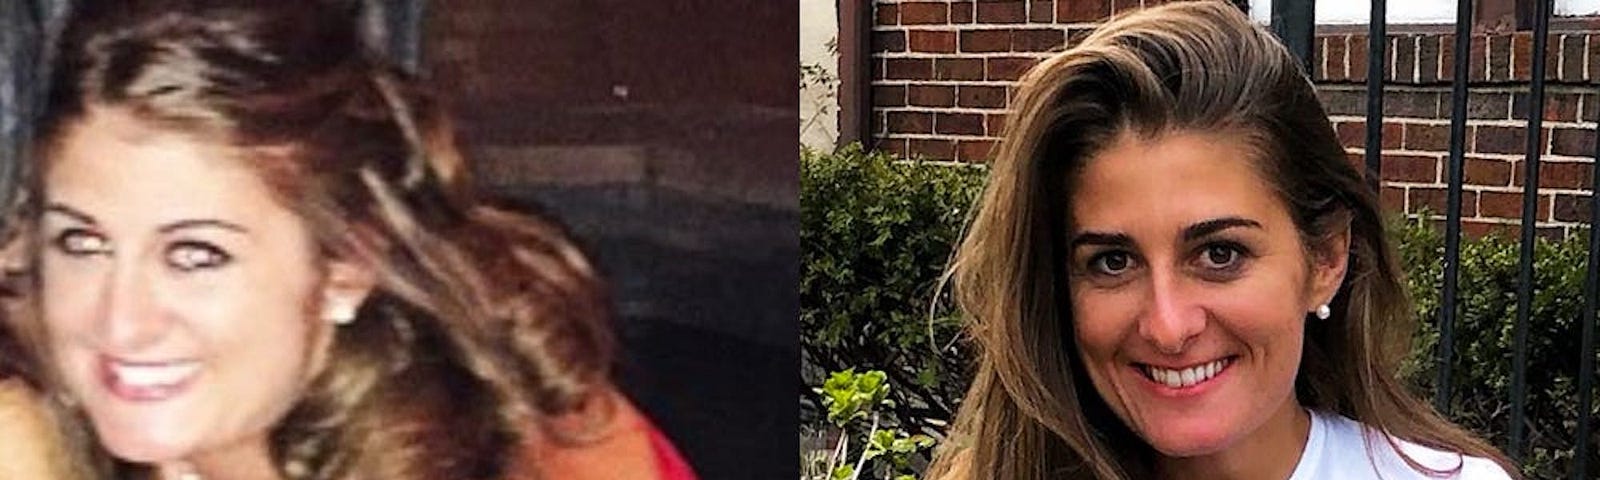 A side-by-side photo of the author before and after losing weight.